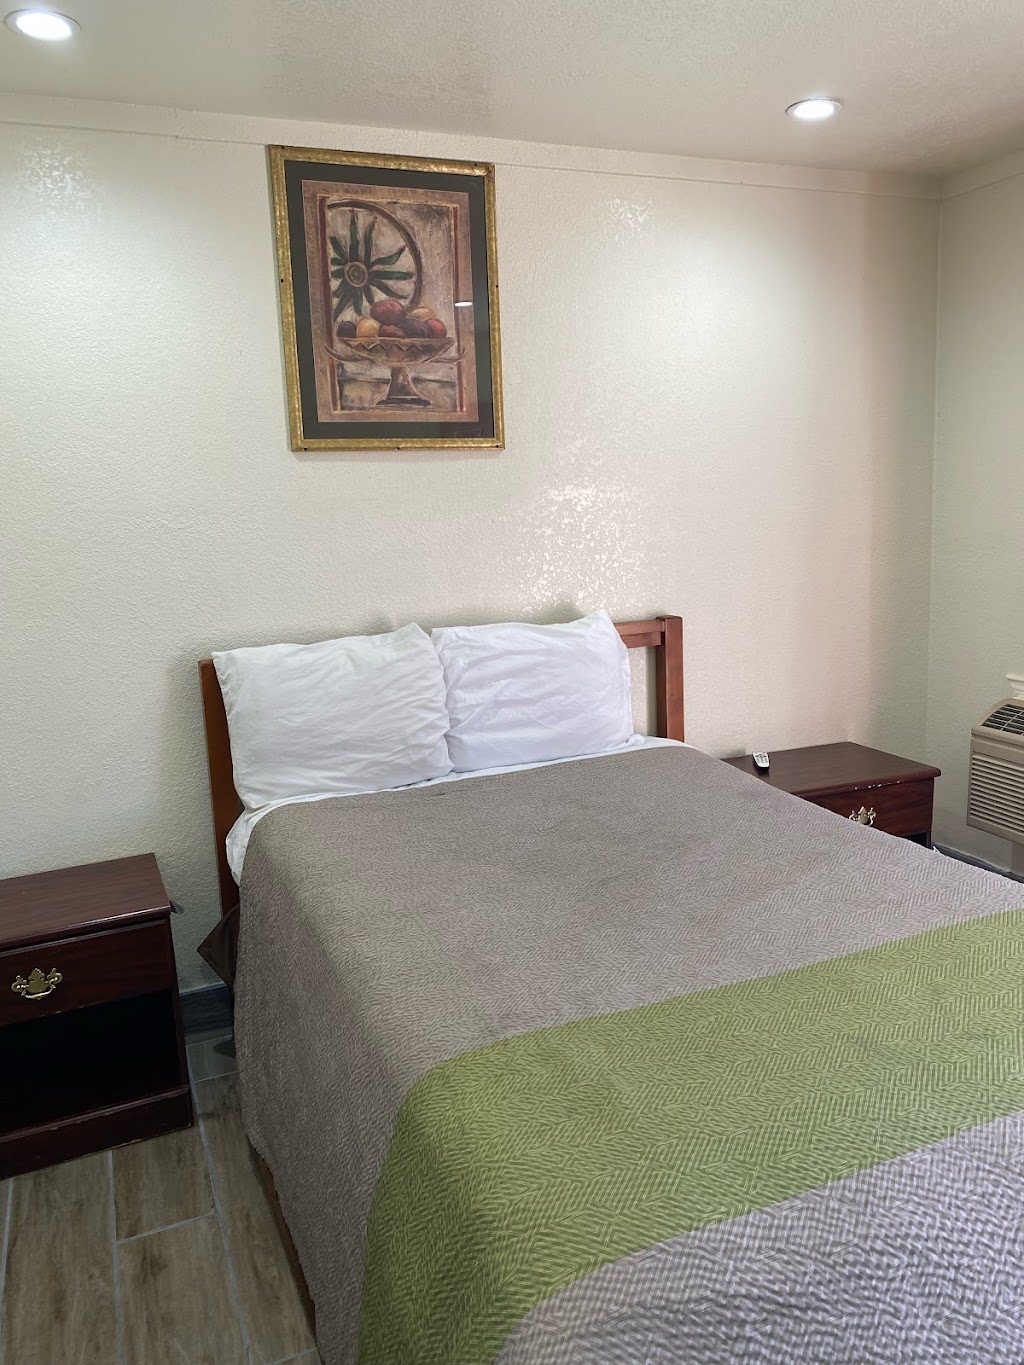 Ace Motel | 3105 S Riverside Dr, Fort Worth, TX 76119 | Phone: (817) 535-4016